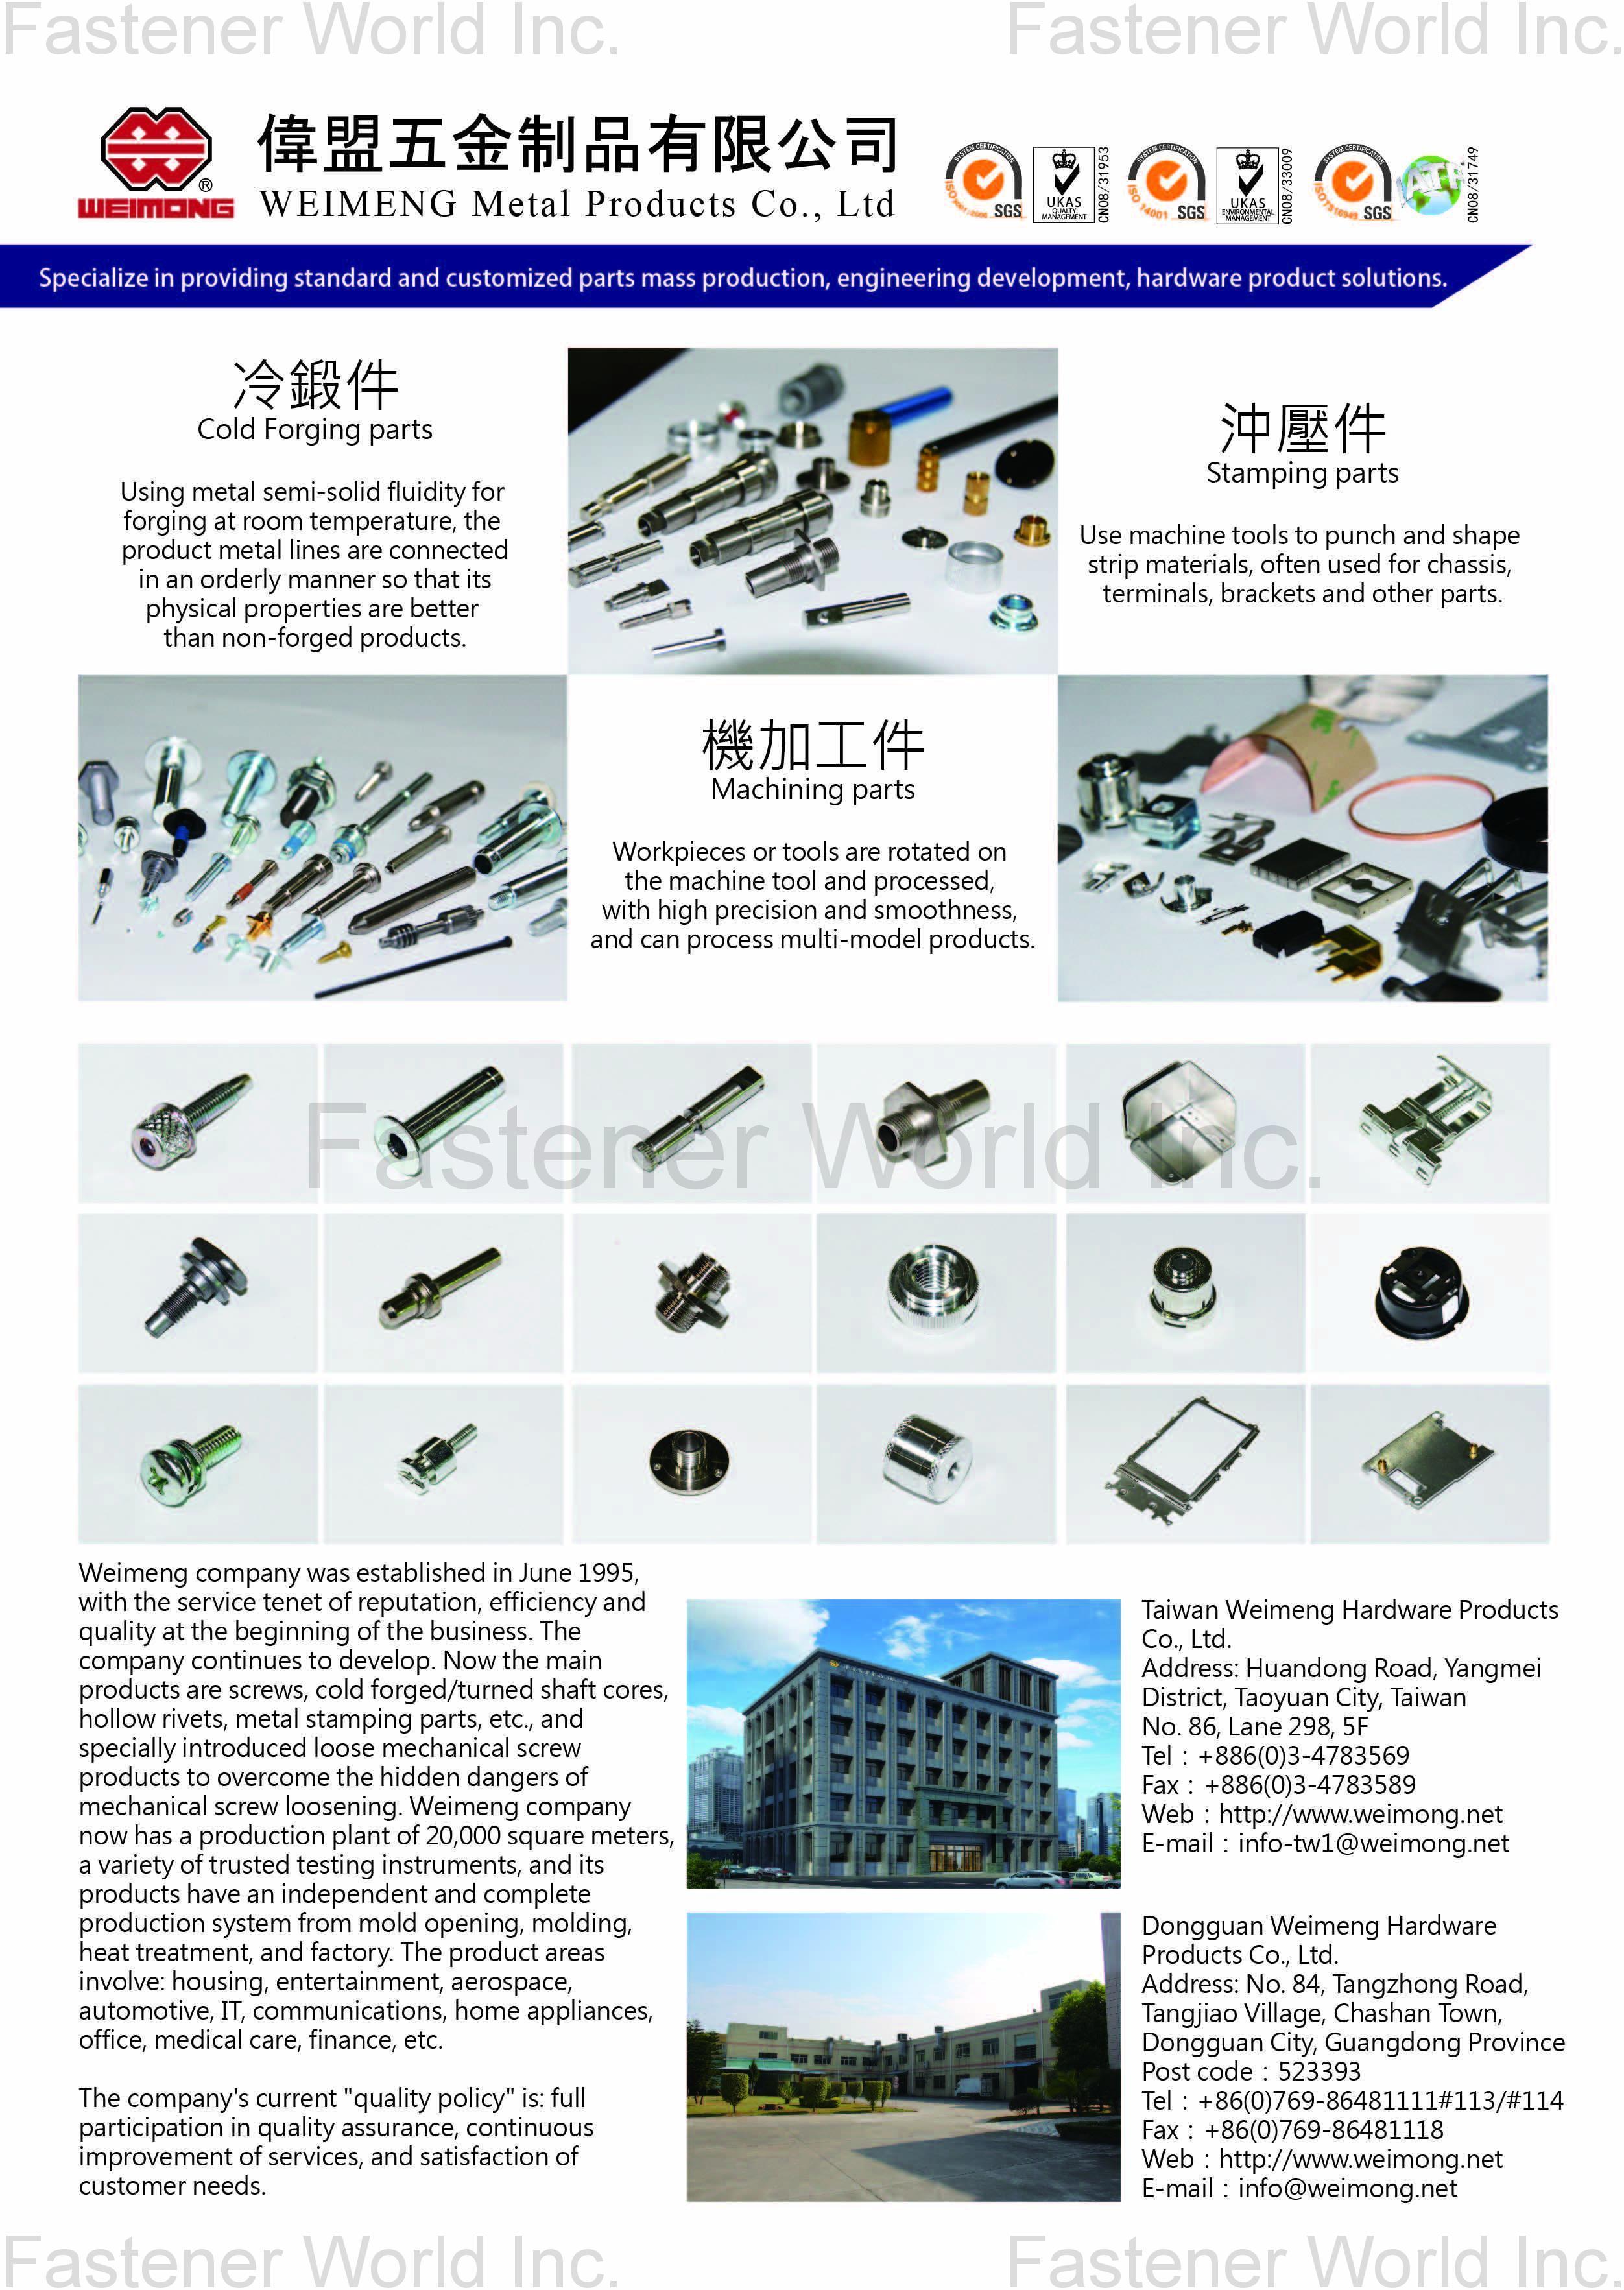 WEIMENG METAL PRODUCTS CO., LTD. , Cold Forging Screw、Stamping、Turning/WEIMONG